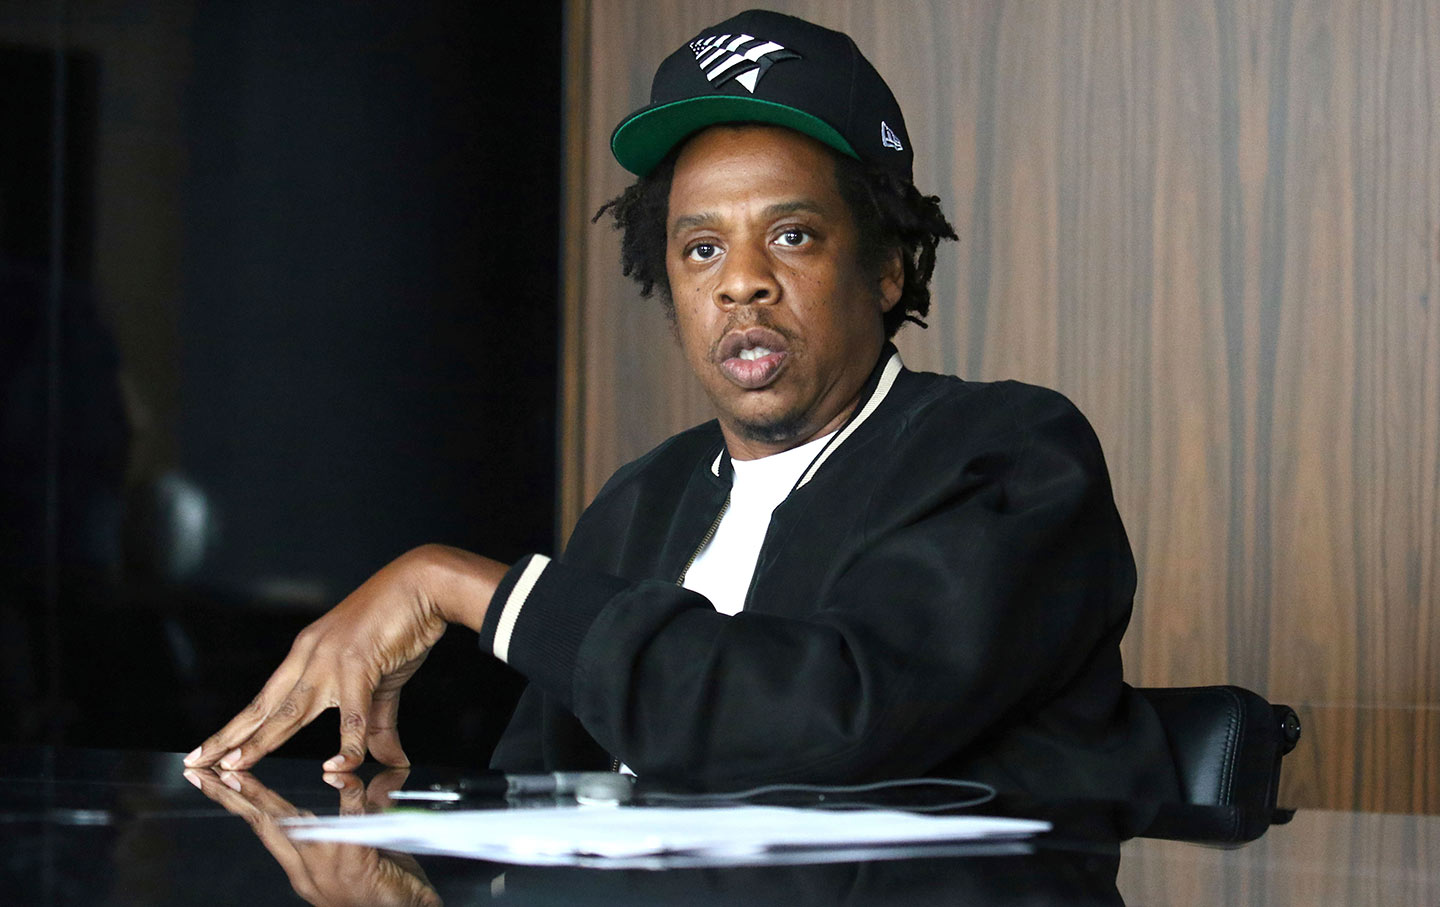 Jay-Z’s Roc Nation accused of stealing A$AP Ferg & GloRilla hits